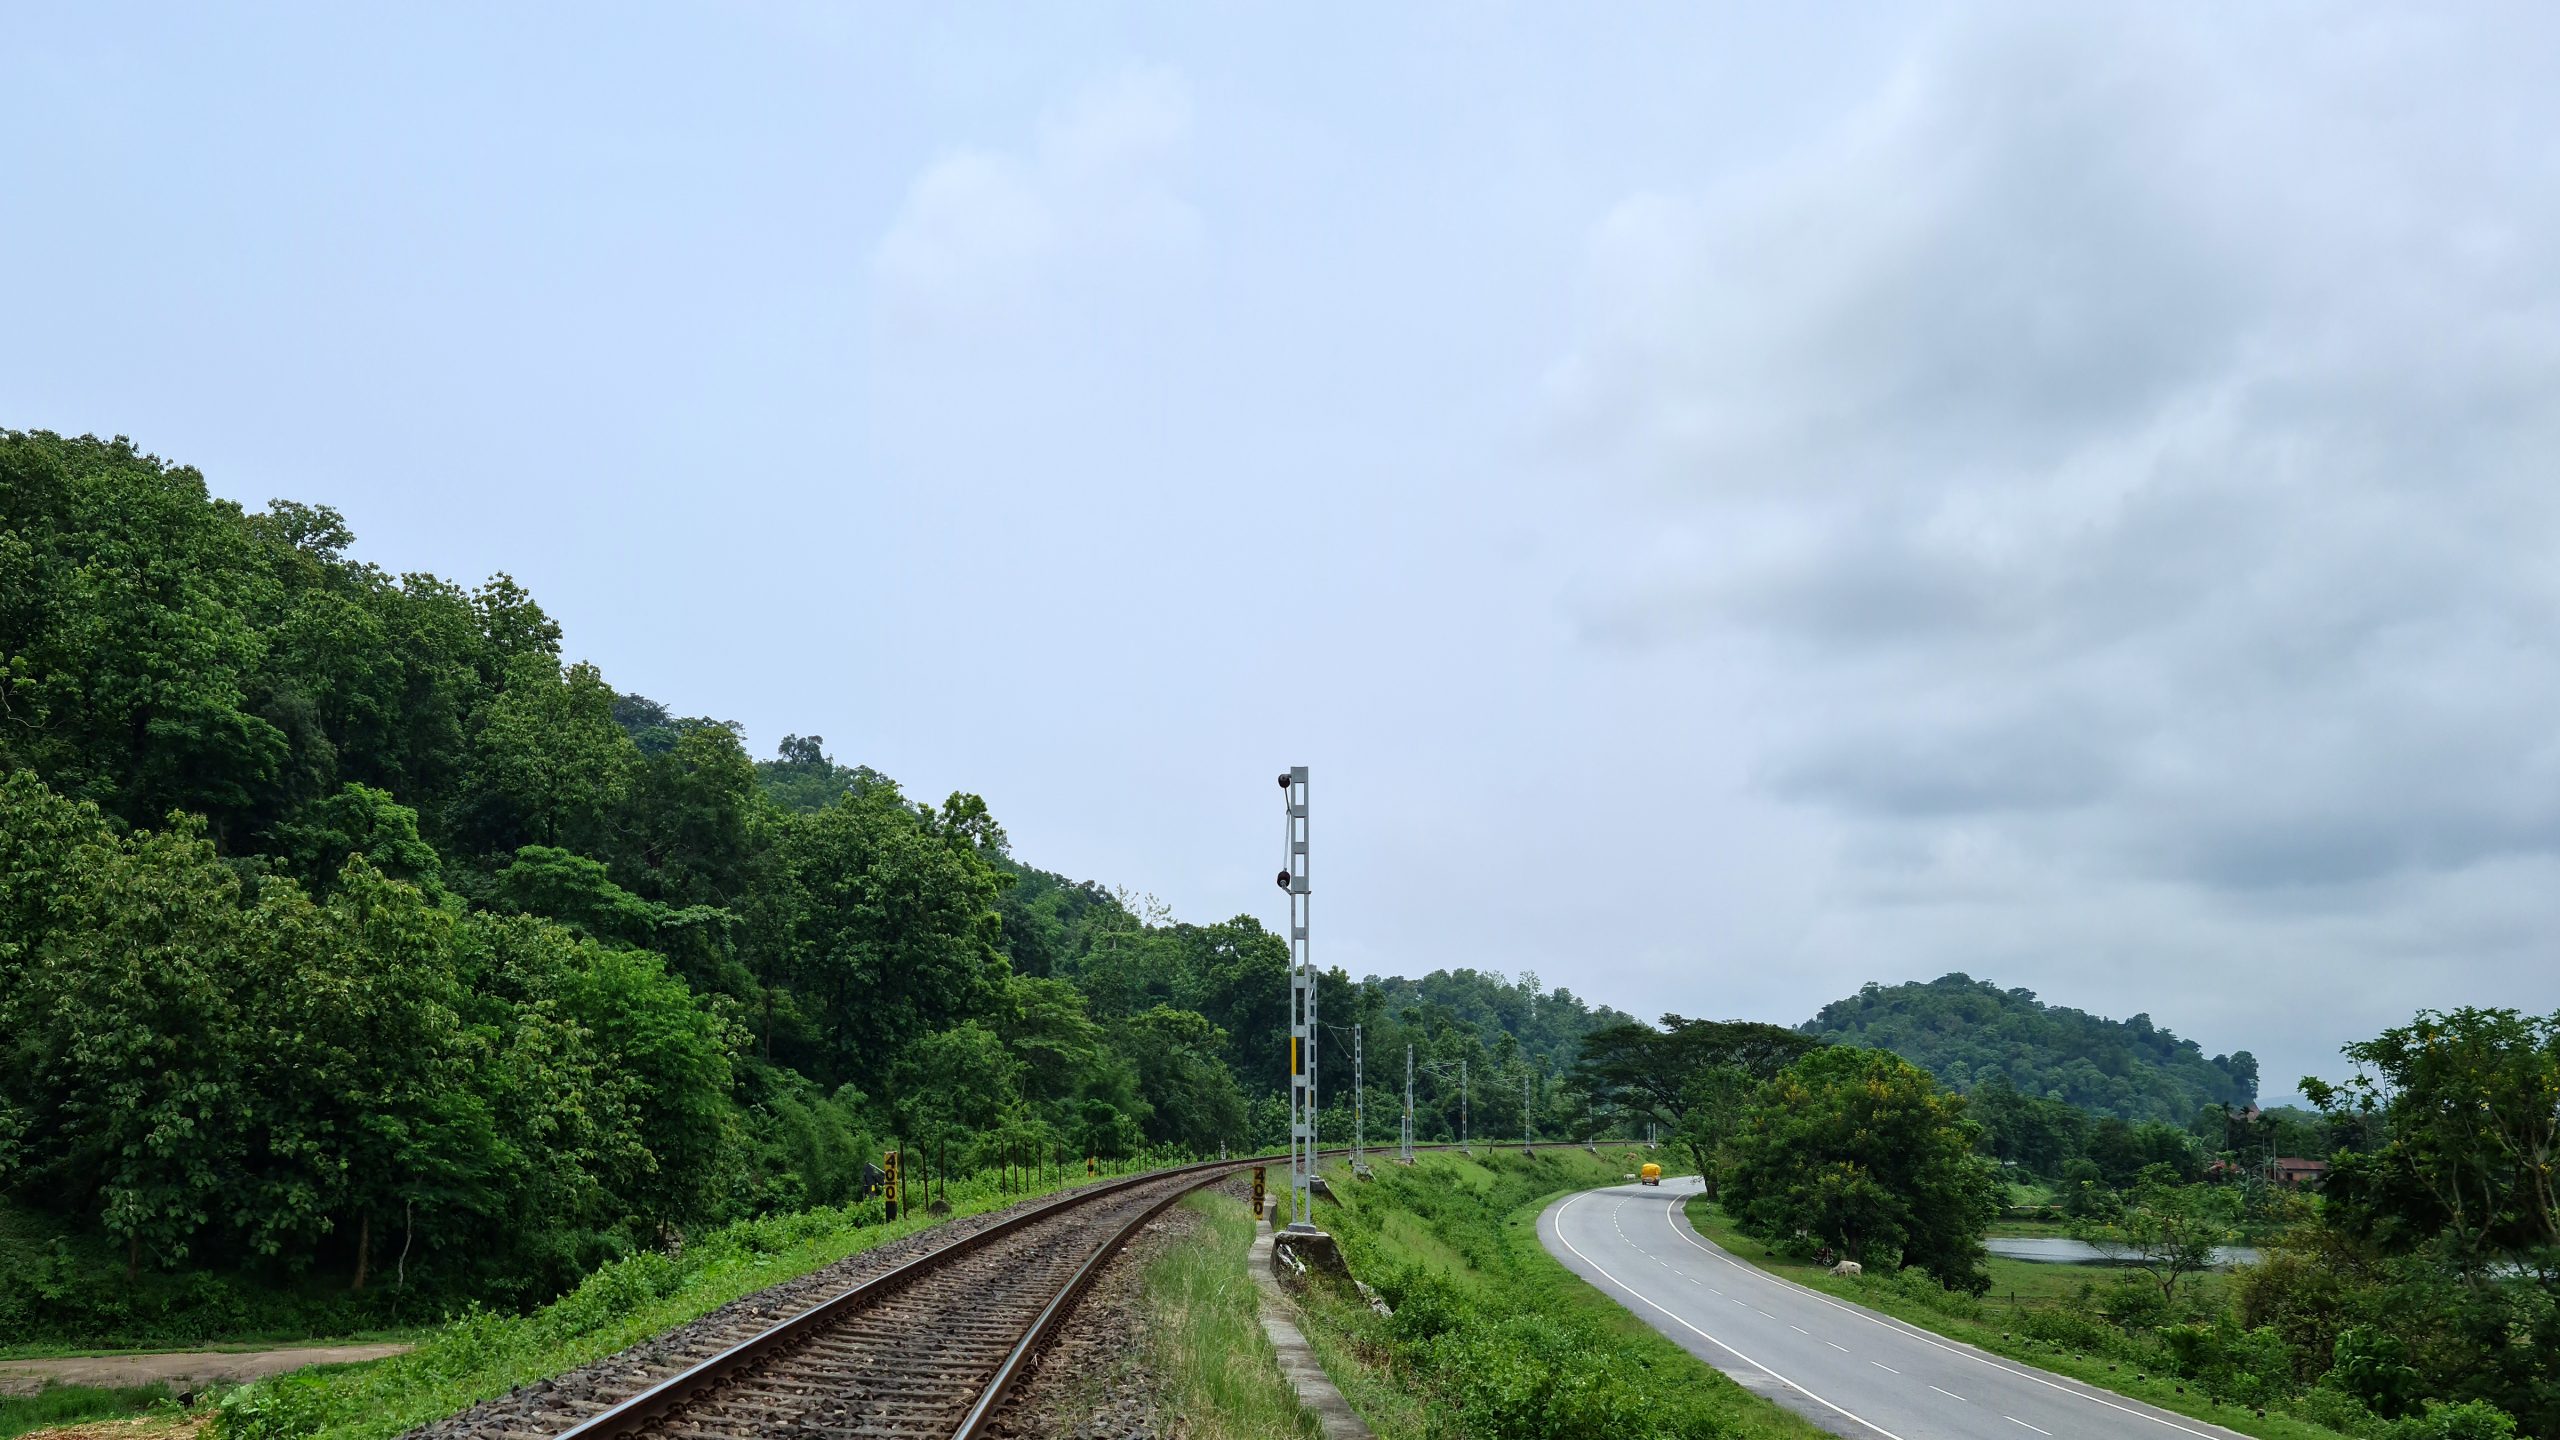 railway line and parallel road